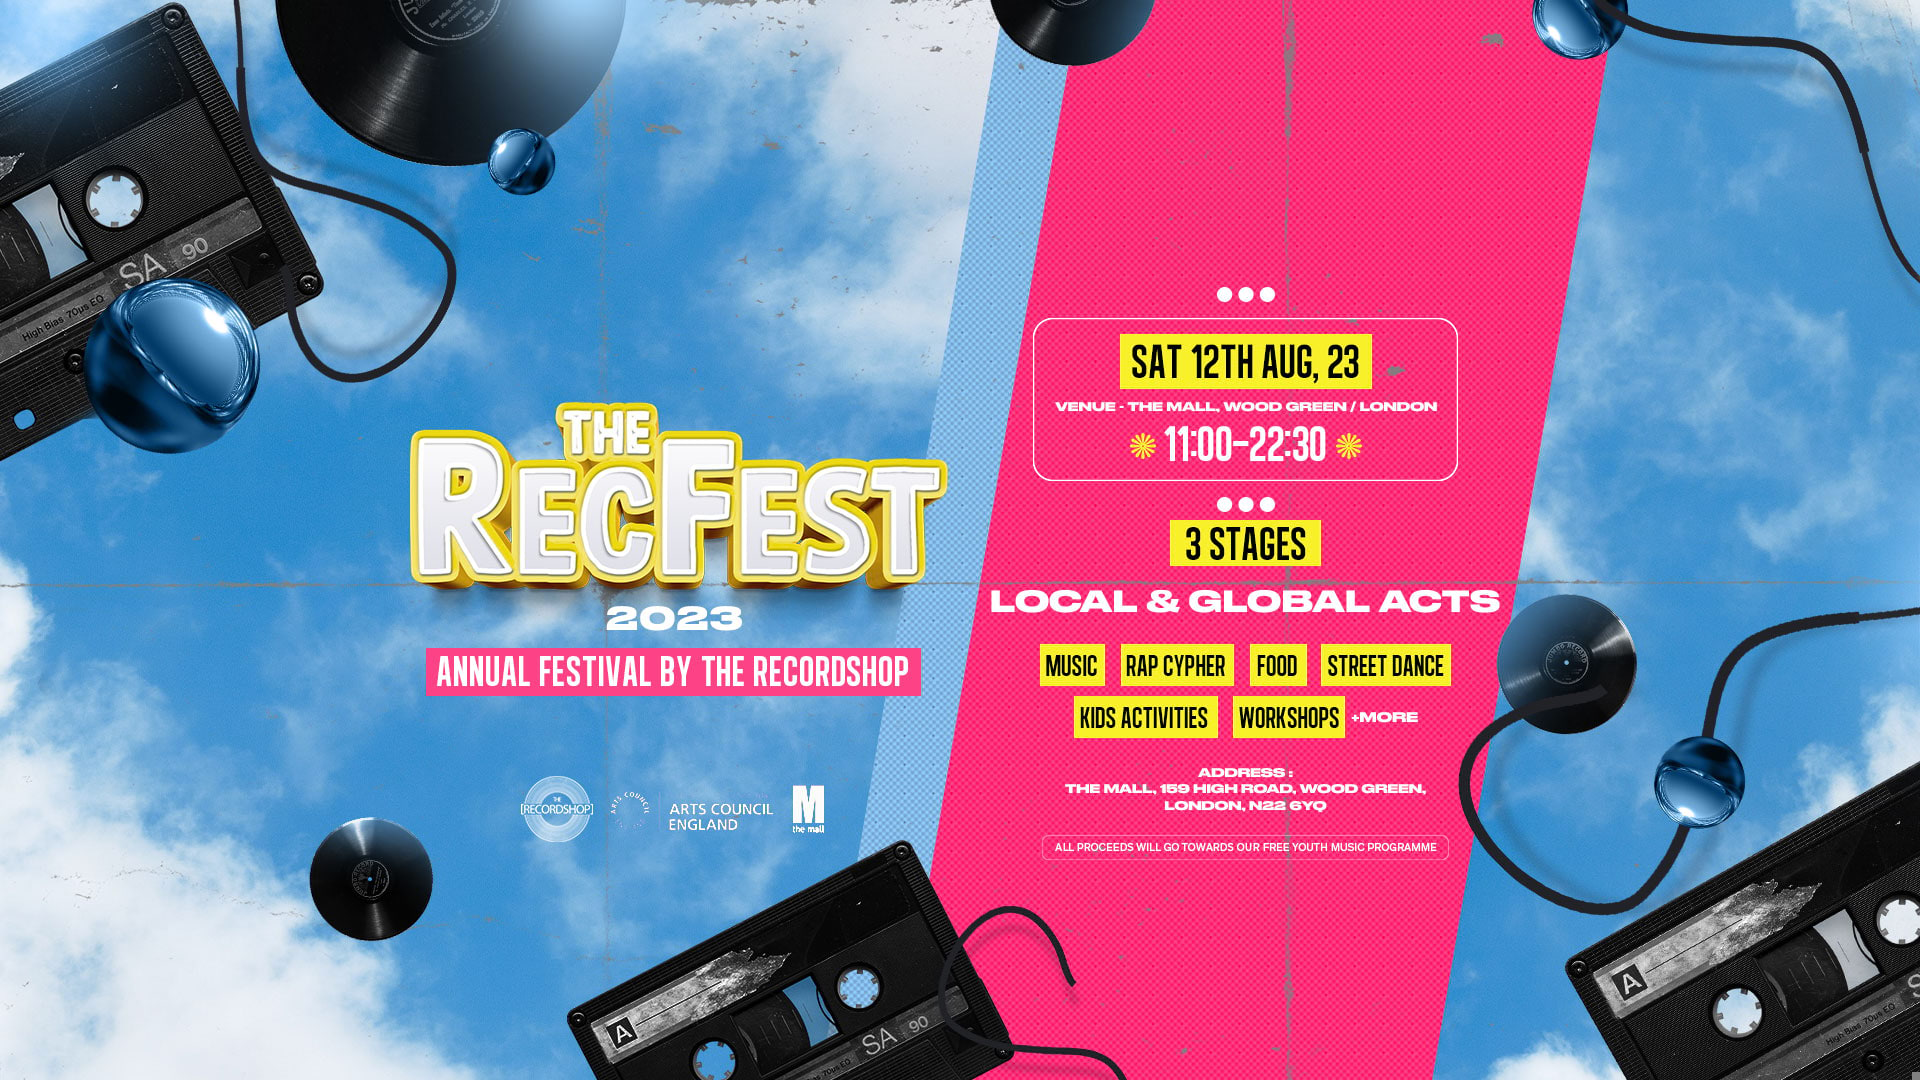 Young musicians find inspiration at The RecFest